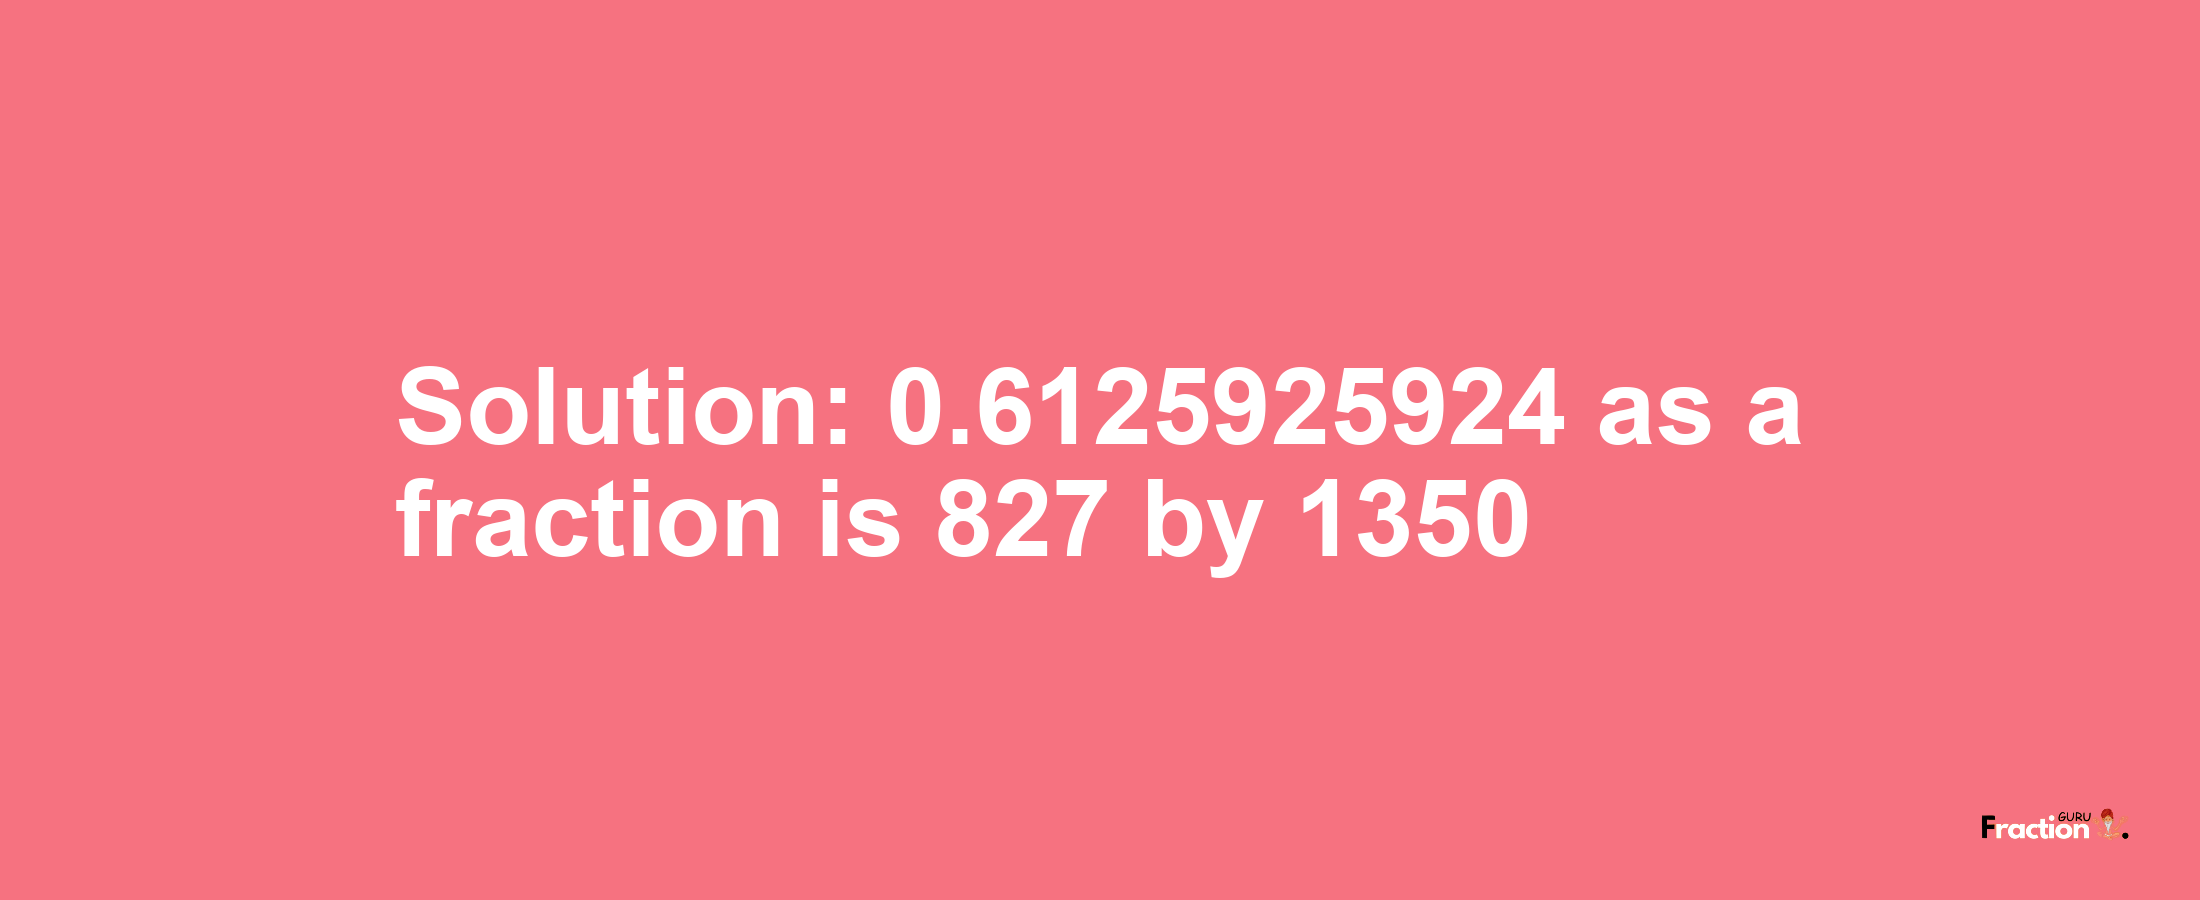 Solution:0.6125925924 as a fraction is 827/1350